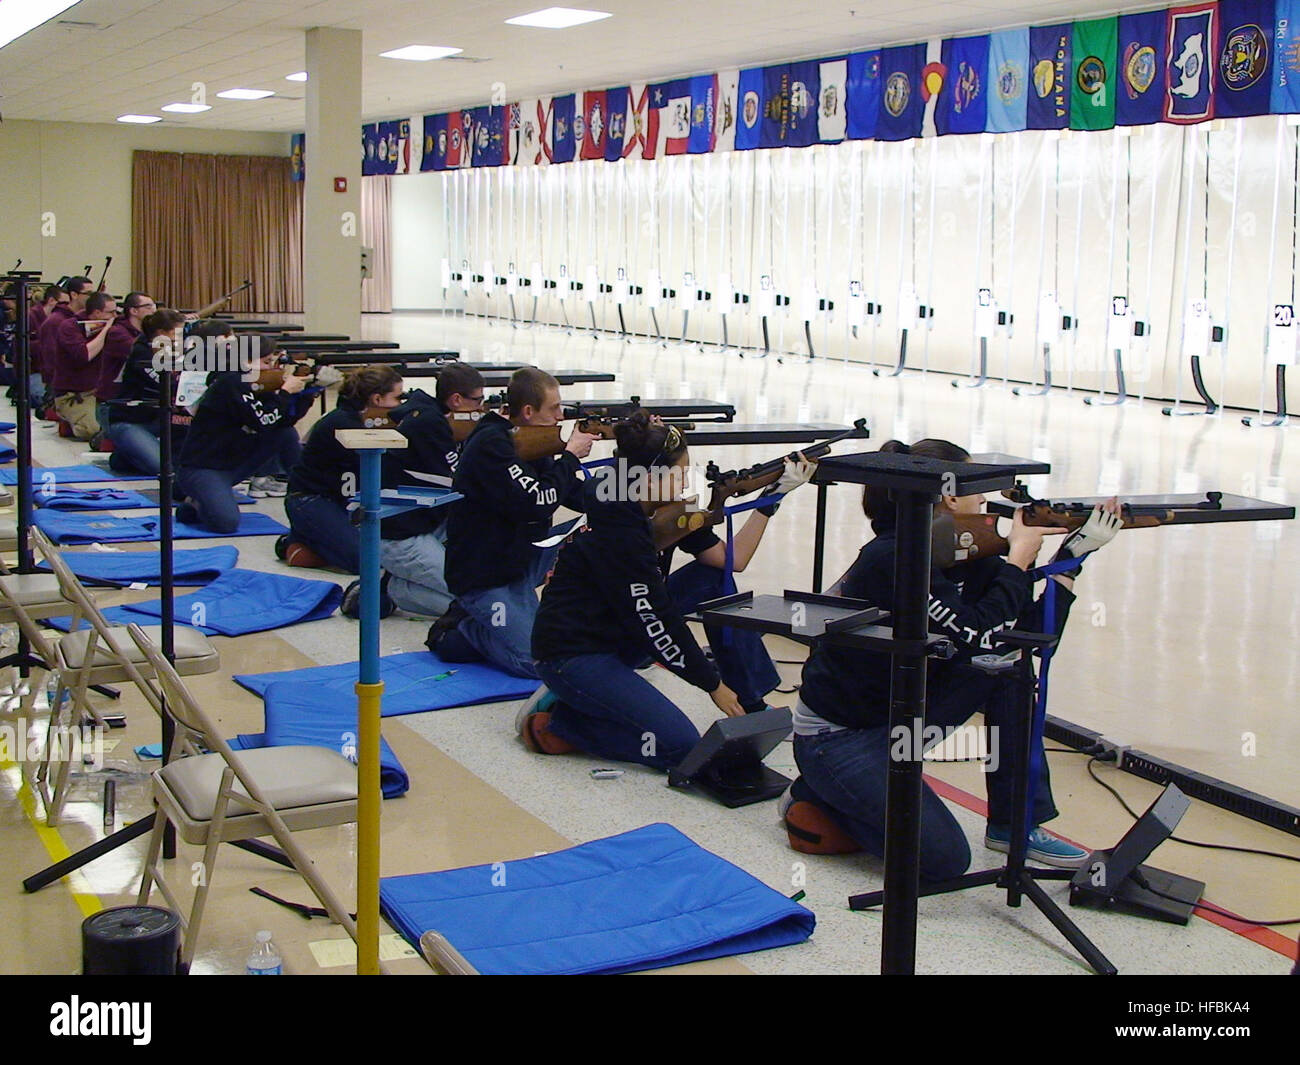 110212-N-FO977-327 ANNISTON, Ala. (Feb. 12, 2011) Navy Junior Reserve Officers Training Corps (NJROTC) sporter division cadets line up in the kneeling firing position as they prepare to fire their first shots during the 2011 NJROTC Air Rifle Championship in Anniston, Ala. Approximately 200 NJROTC cadets from 51 high schools across the United States participated in the competition. (U.S. Navy photo by Mike Miller/Released)  - Official U.S. Navy Imagery - NJROTC cadets take part in air rifle competition. Stock Photo